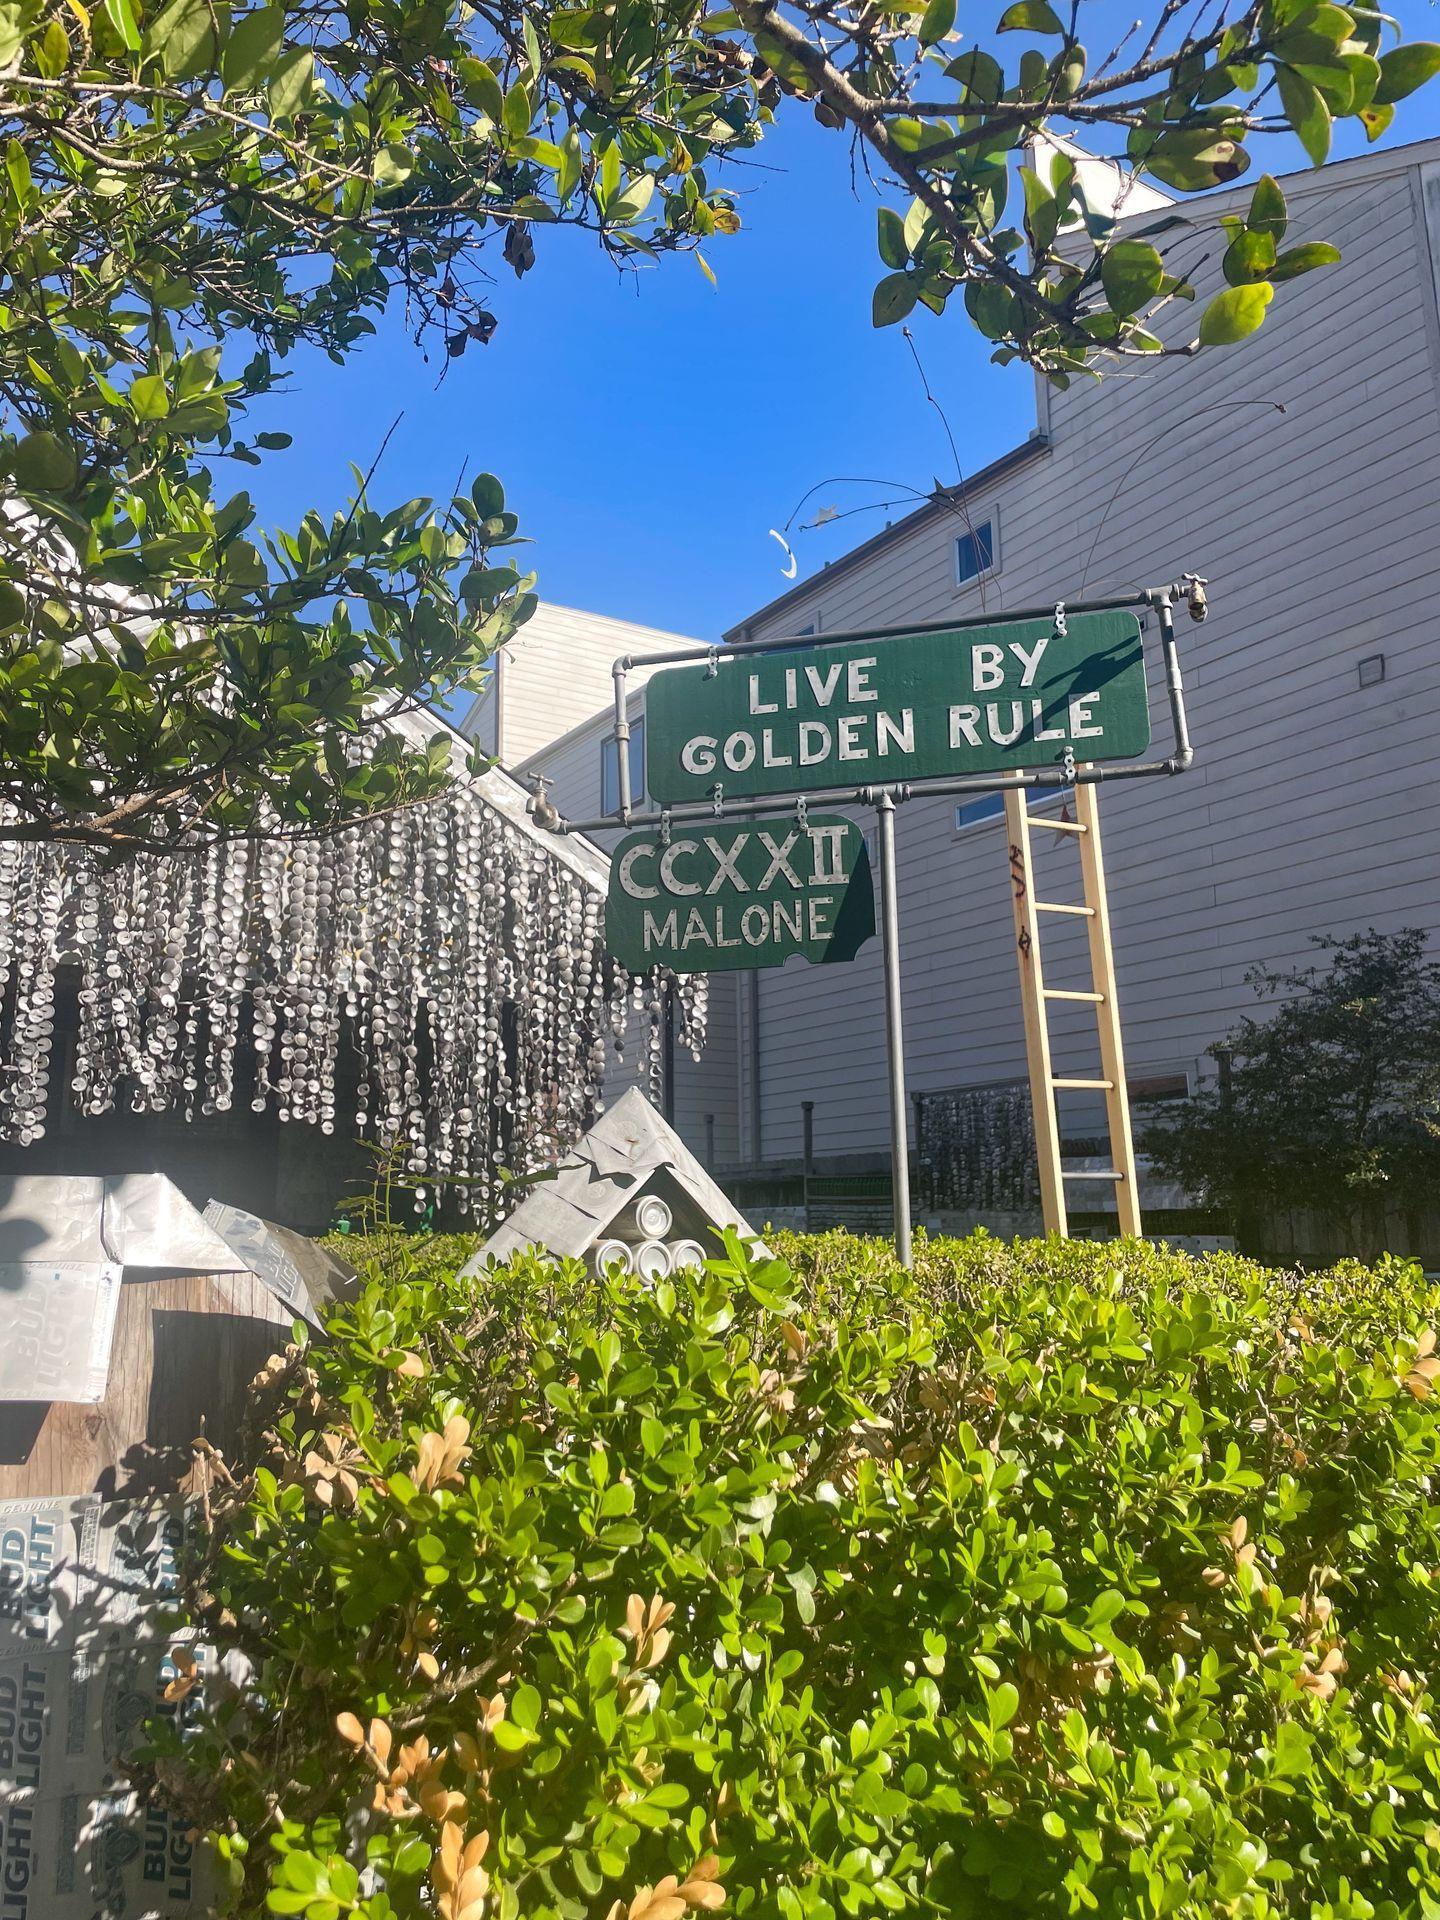 A sign that reads 'Live by golden rule' in front of the Beer Can House